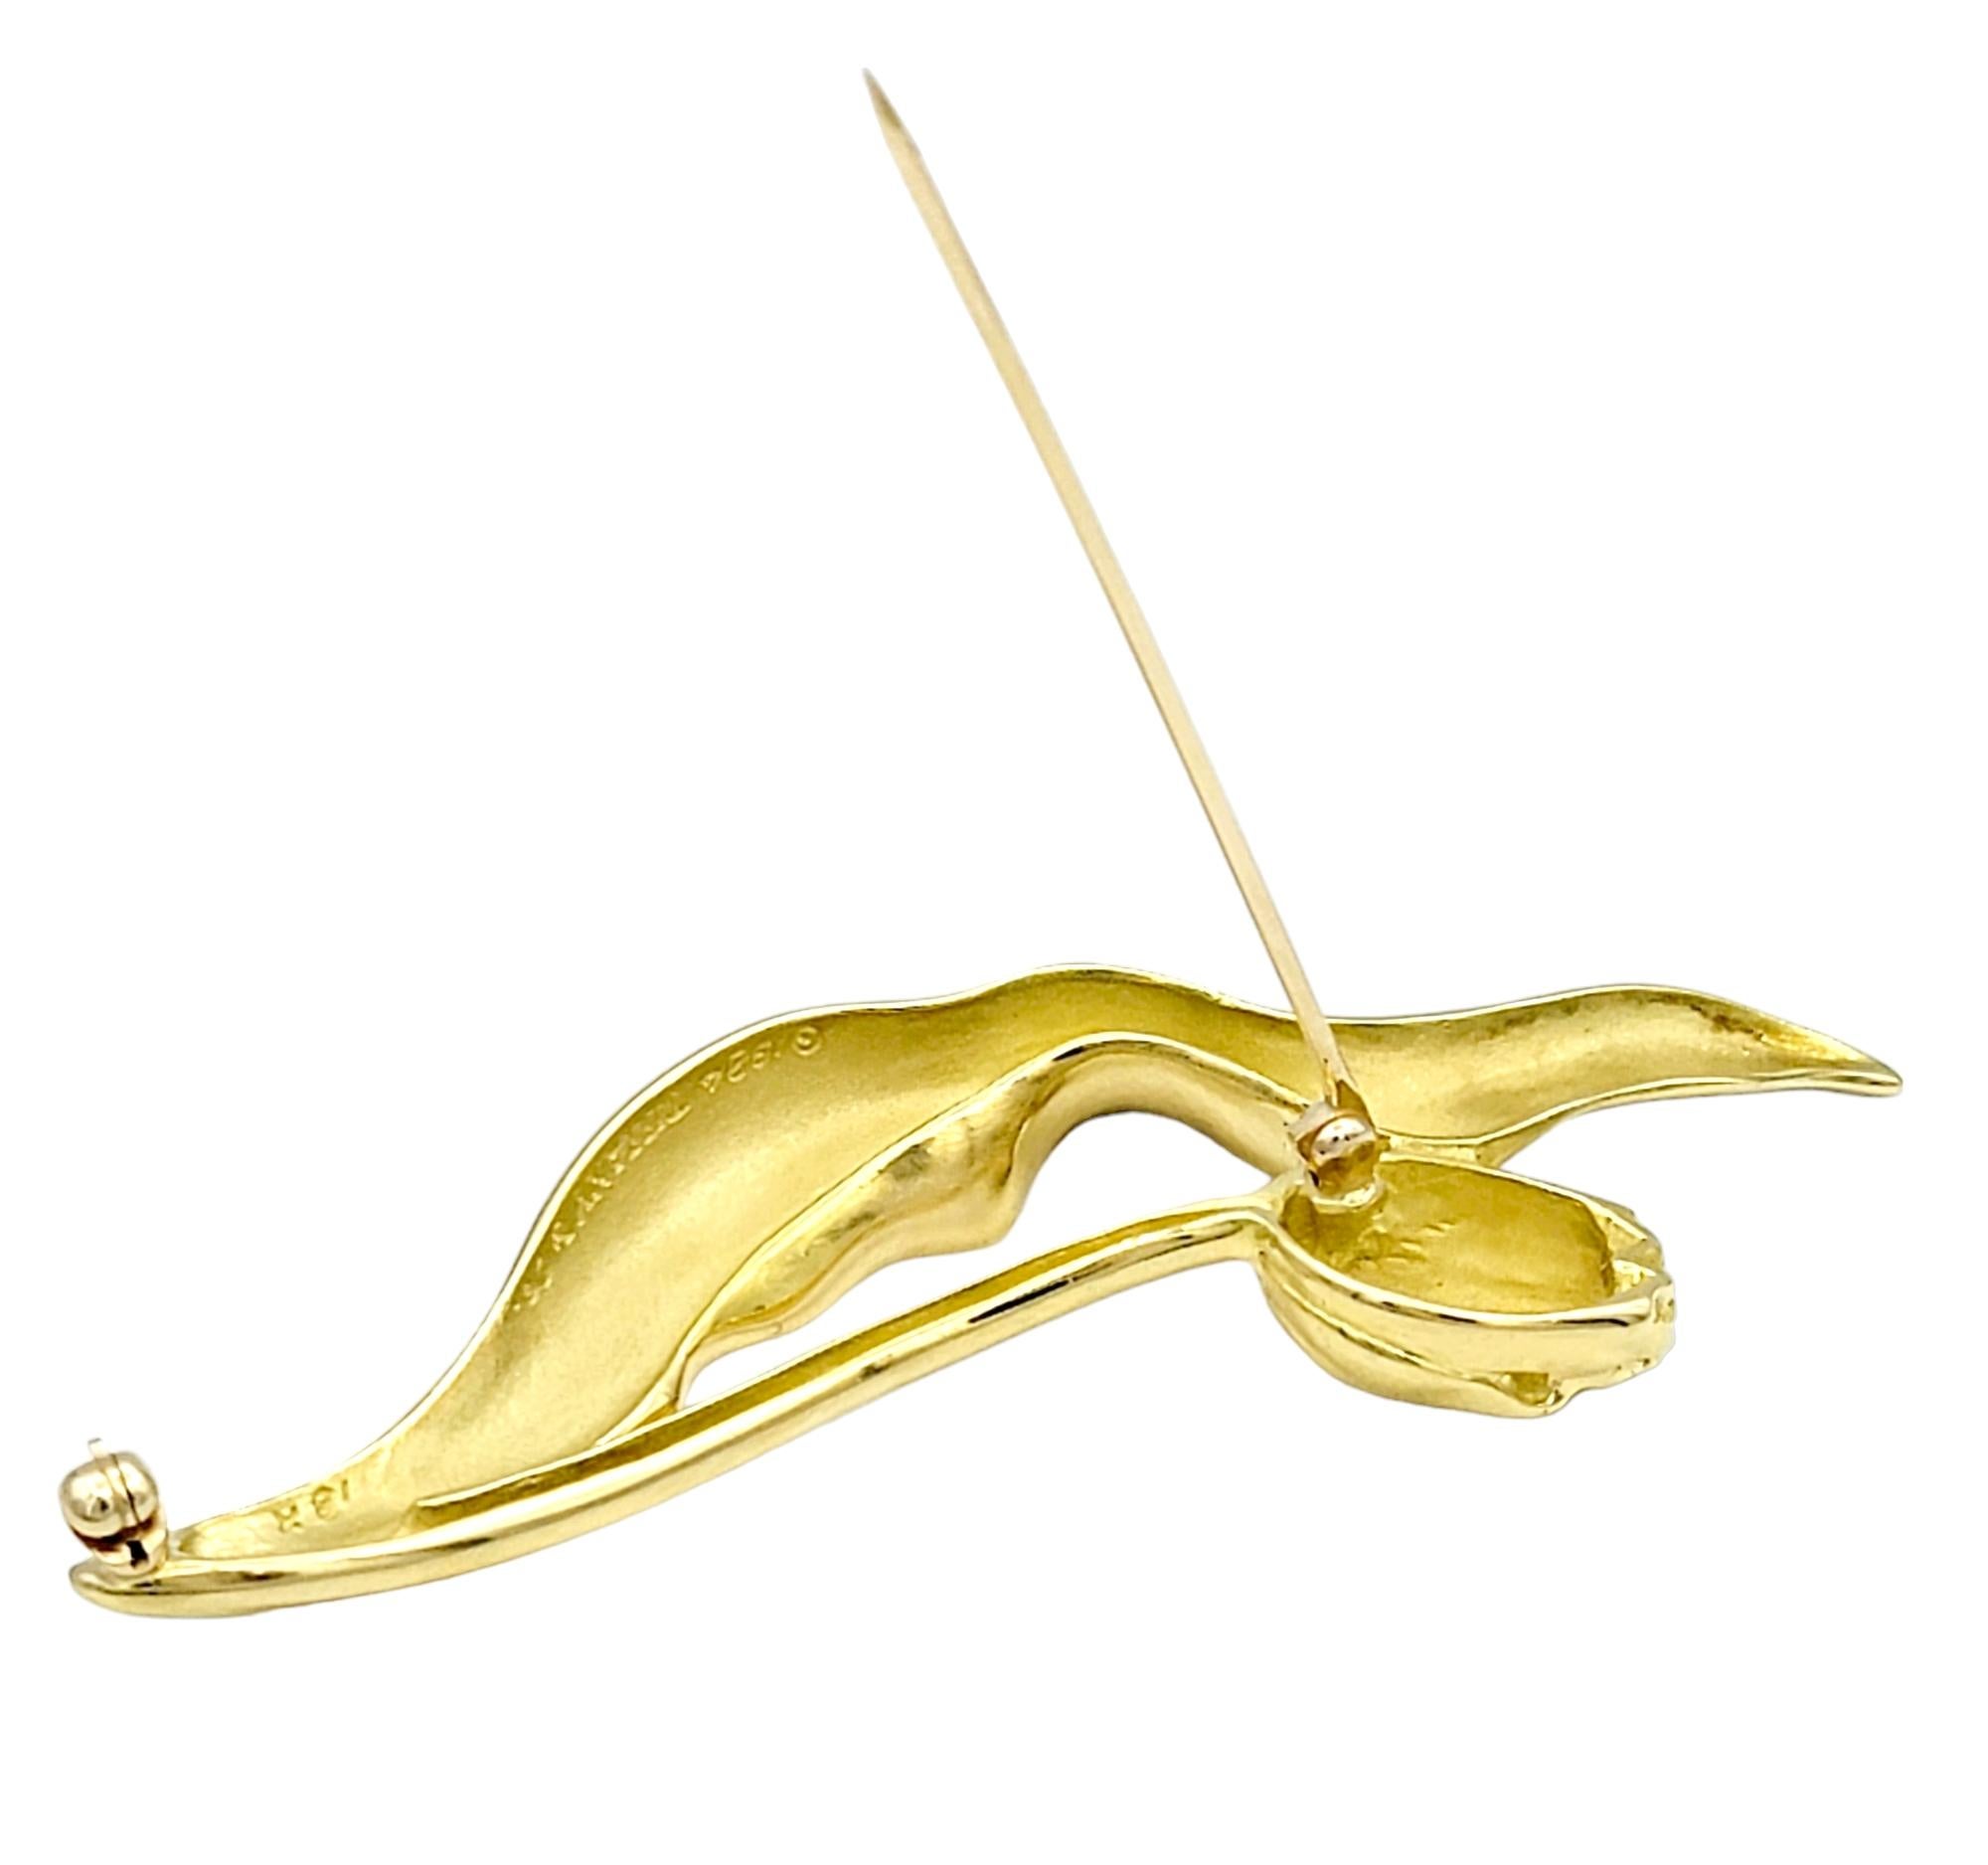 Vintage 1984 Tiffany & Co. Tulip Brooch / Pin in Polished 18 Karat Yellow Gold For Sale 1